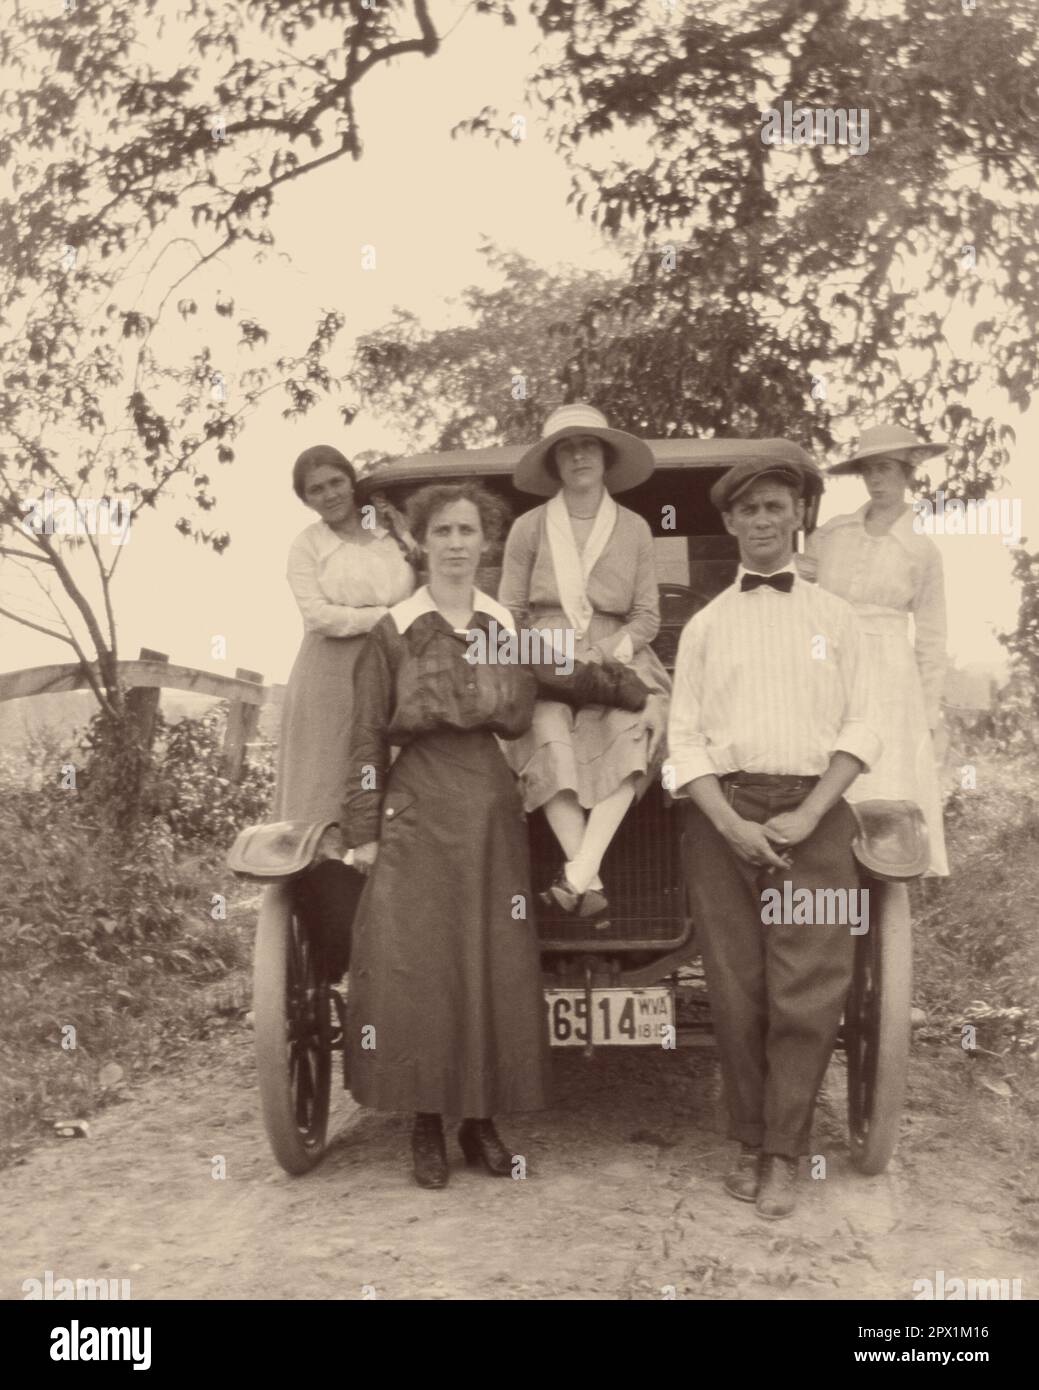 1910s MAN AND WOMAN STANDING IN FRONT OF AUTOMOBILE WITH THREE WOMEN POSED SITTING STANDING ON THE CAR ALL LOOKING AT CAMERA - o3981 HAR001 HARS BROTHERS RURAL SPOUSE EXTENDED HUSBANDS COPY SPACE FRIENDSHIP FULL-LENGTH HALF-LENGTH LADIES PERSONS AUTOMOBILE MALES SIBLINGS SISTERS TRANSPORTATION B&W PARTNER EYE CONTACT ADVENTURE AUTOS PRIDE SIBLING CONNECTION AUTOMOBILES STYLISH VEHICLES IN FRONT OF COOPERATION MID-ADULT MID-ADULT MAN MID-ADULT WOMAN POSED TOGETHERNESS WIVES YOUNG ADULT WOMAN BLACK AND WHITE CAUCASIAN ETHNICITY HAR001 HUMORLESS OLD FASHIONED Stock Photo